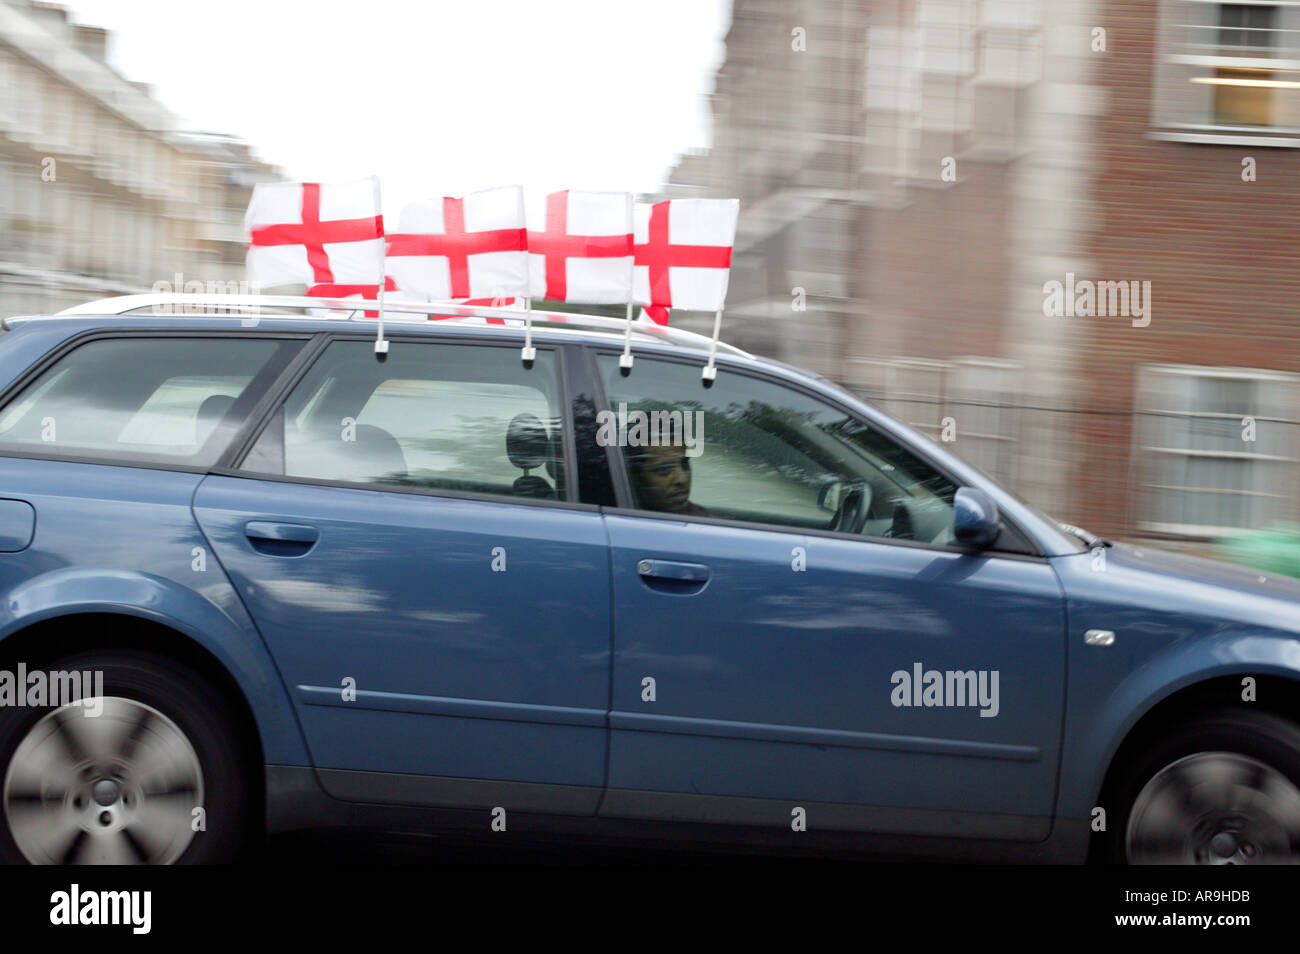 Car with england flags Stock Photo